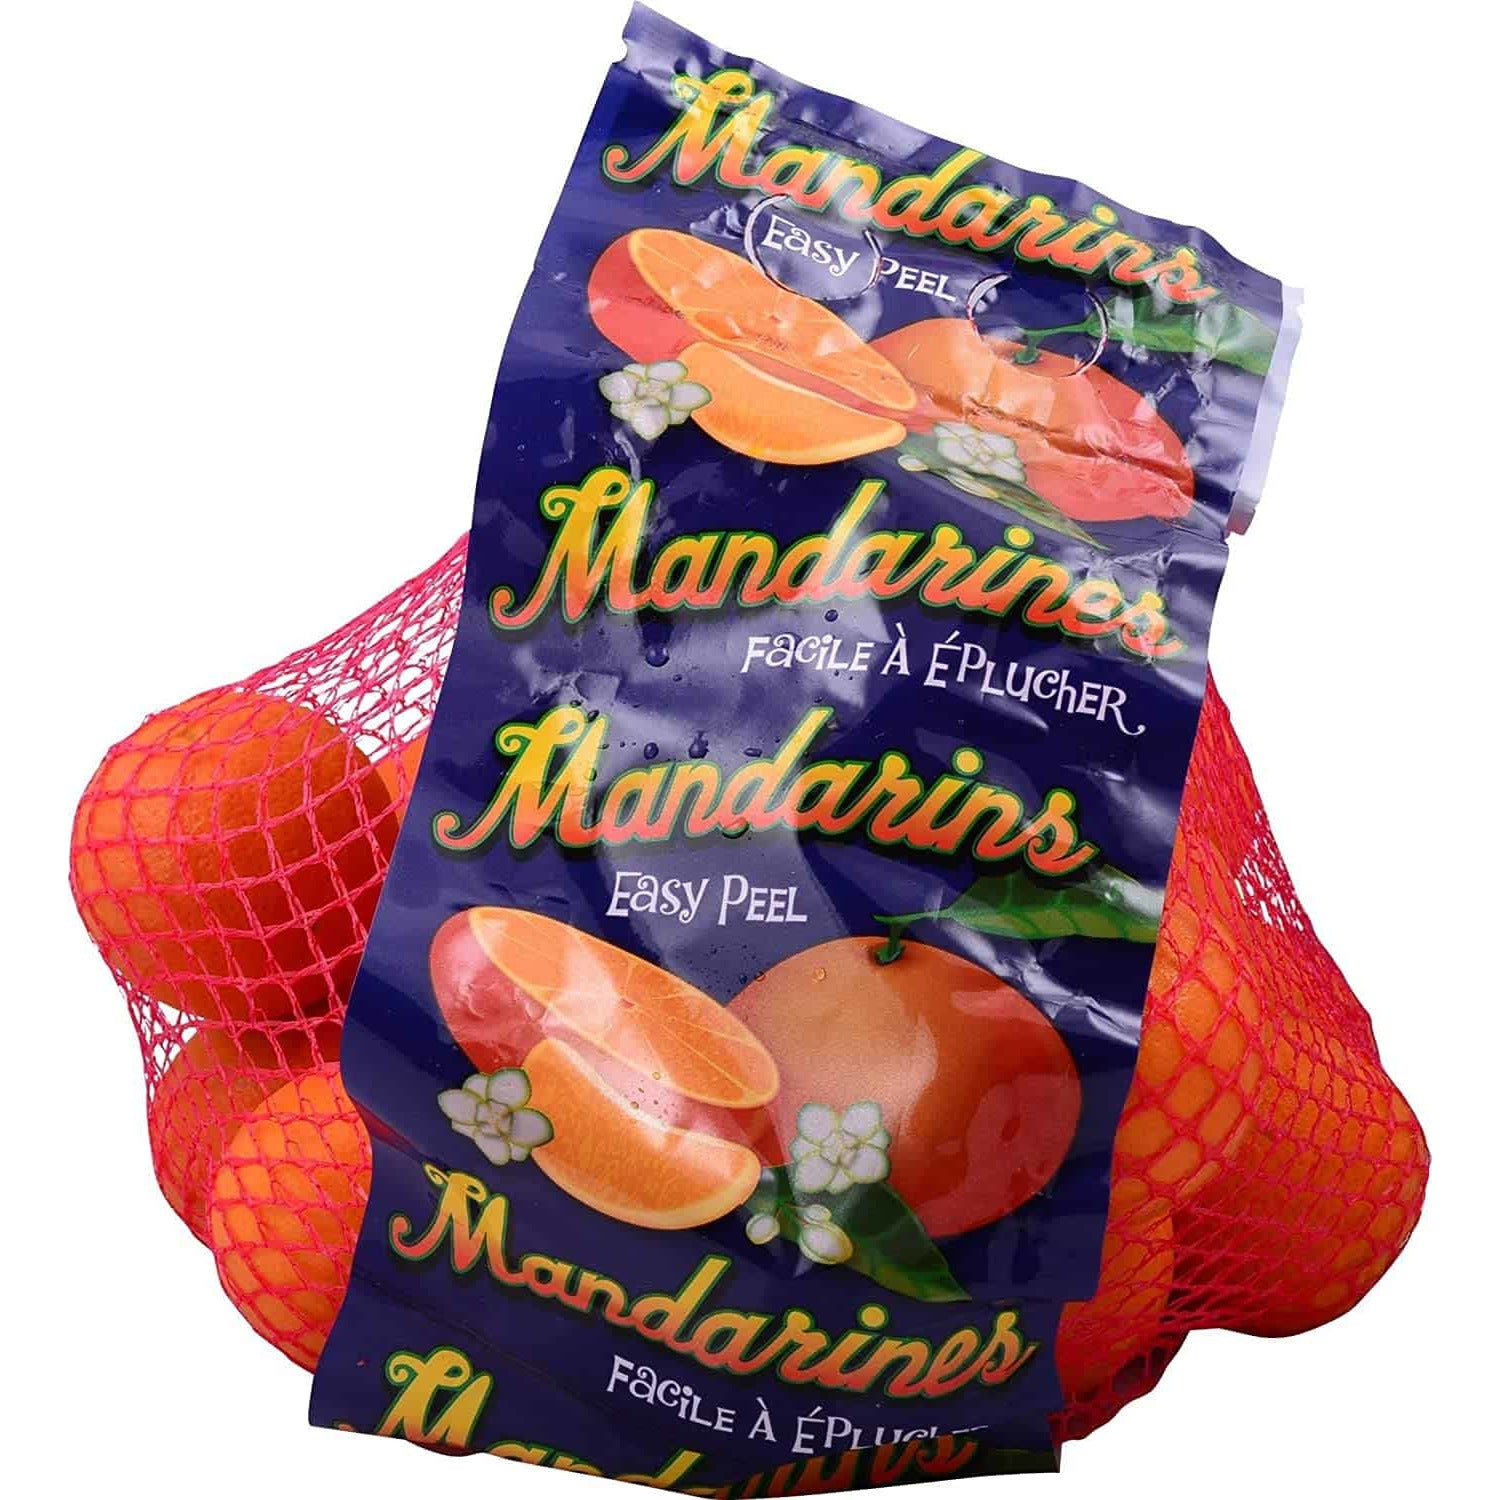 Mandarin Clementine Conventional, 48 Ounce